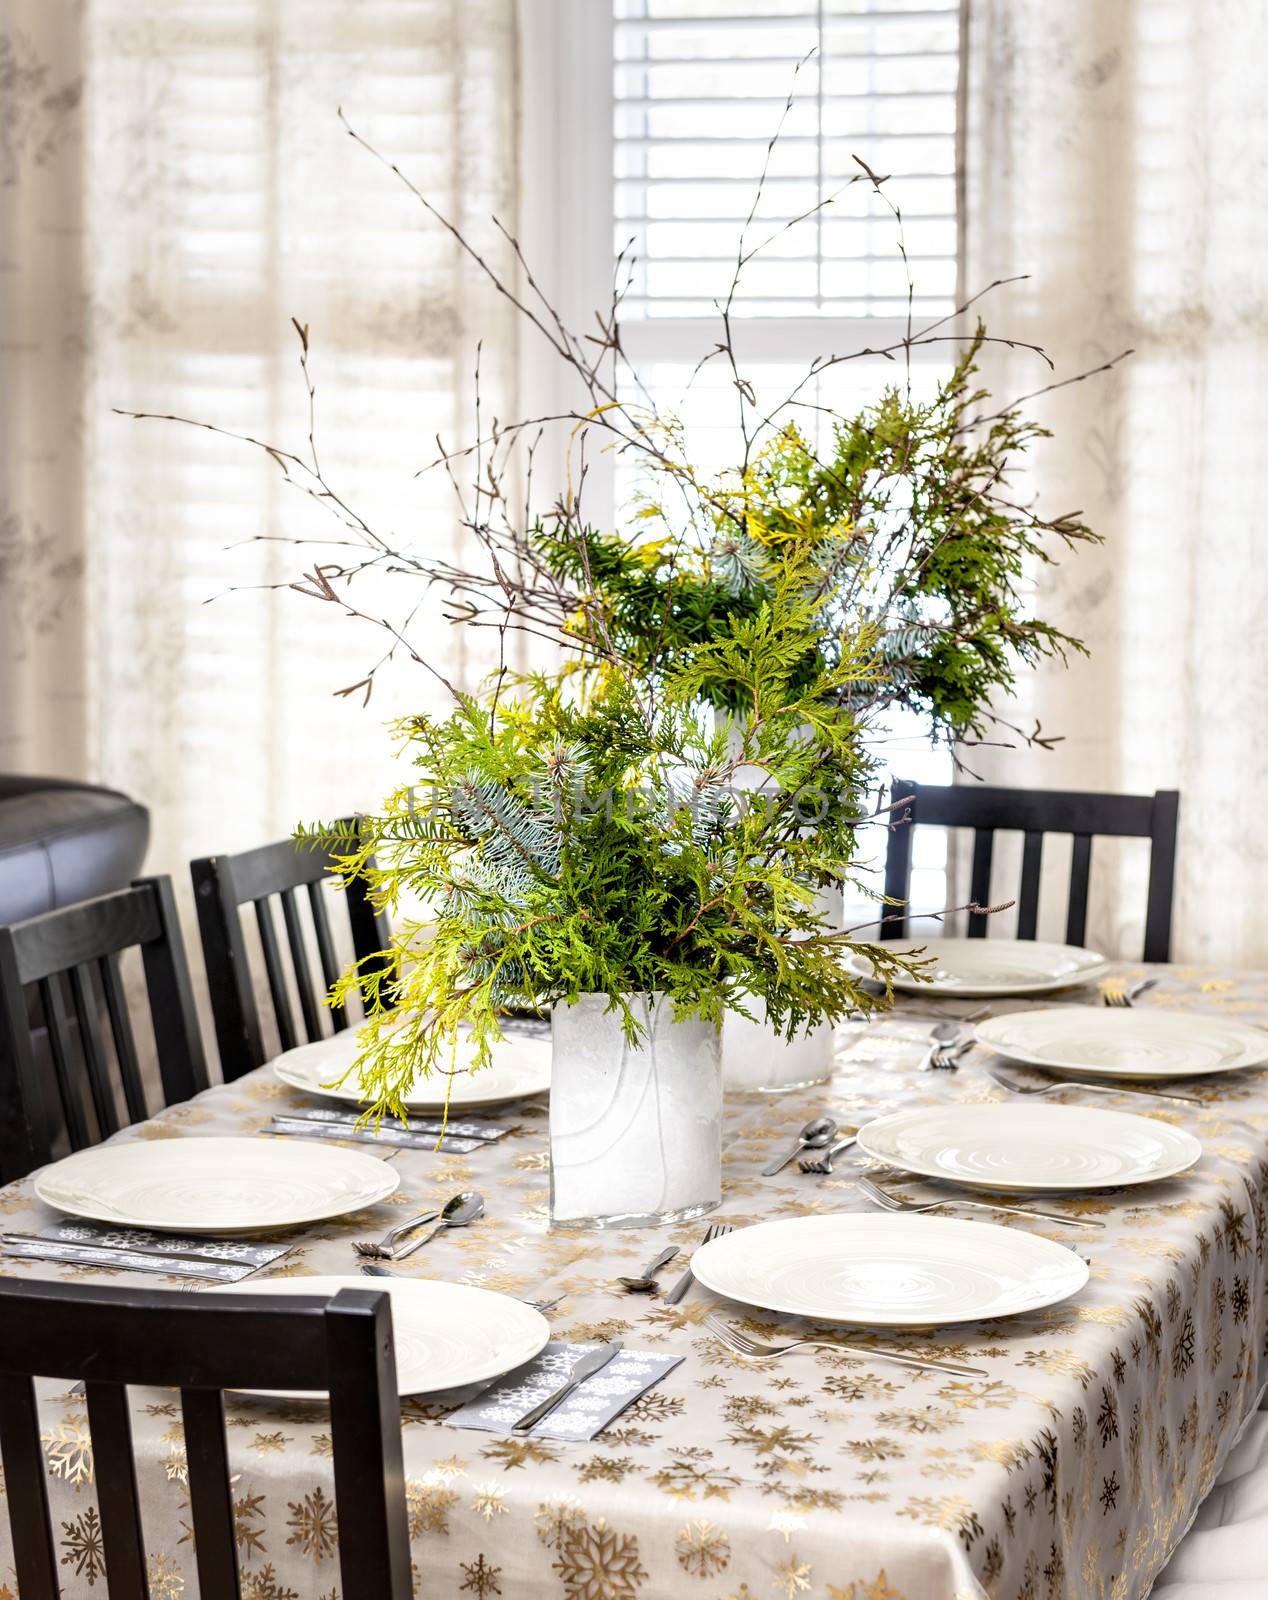 Dining table decorated for Christmas with eight place settings and evergreen centerpiece